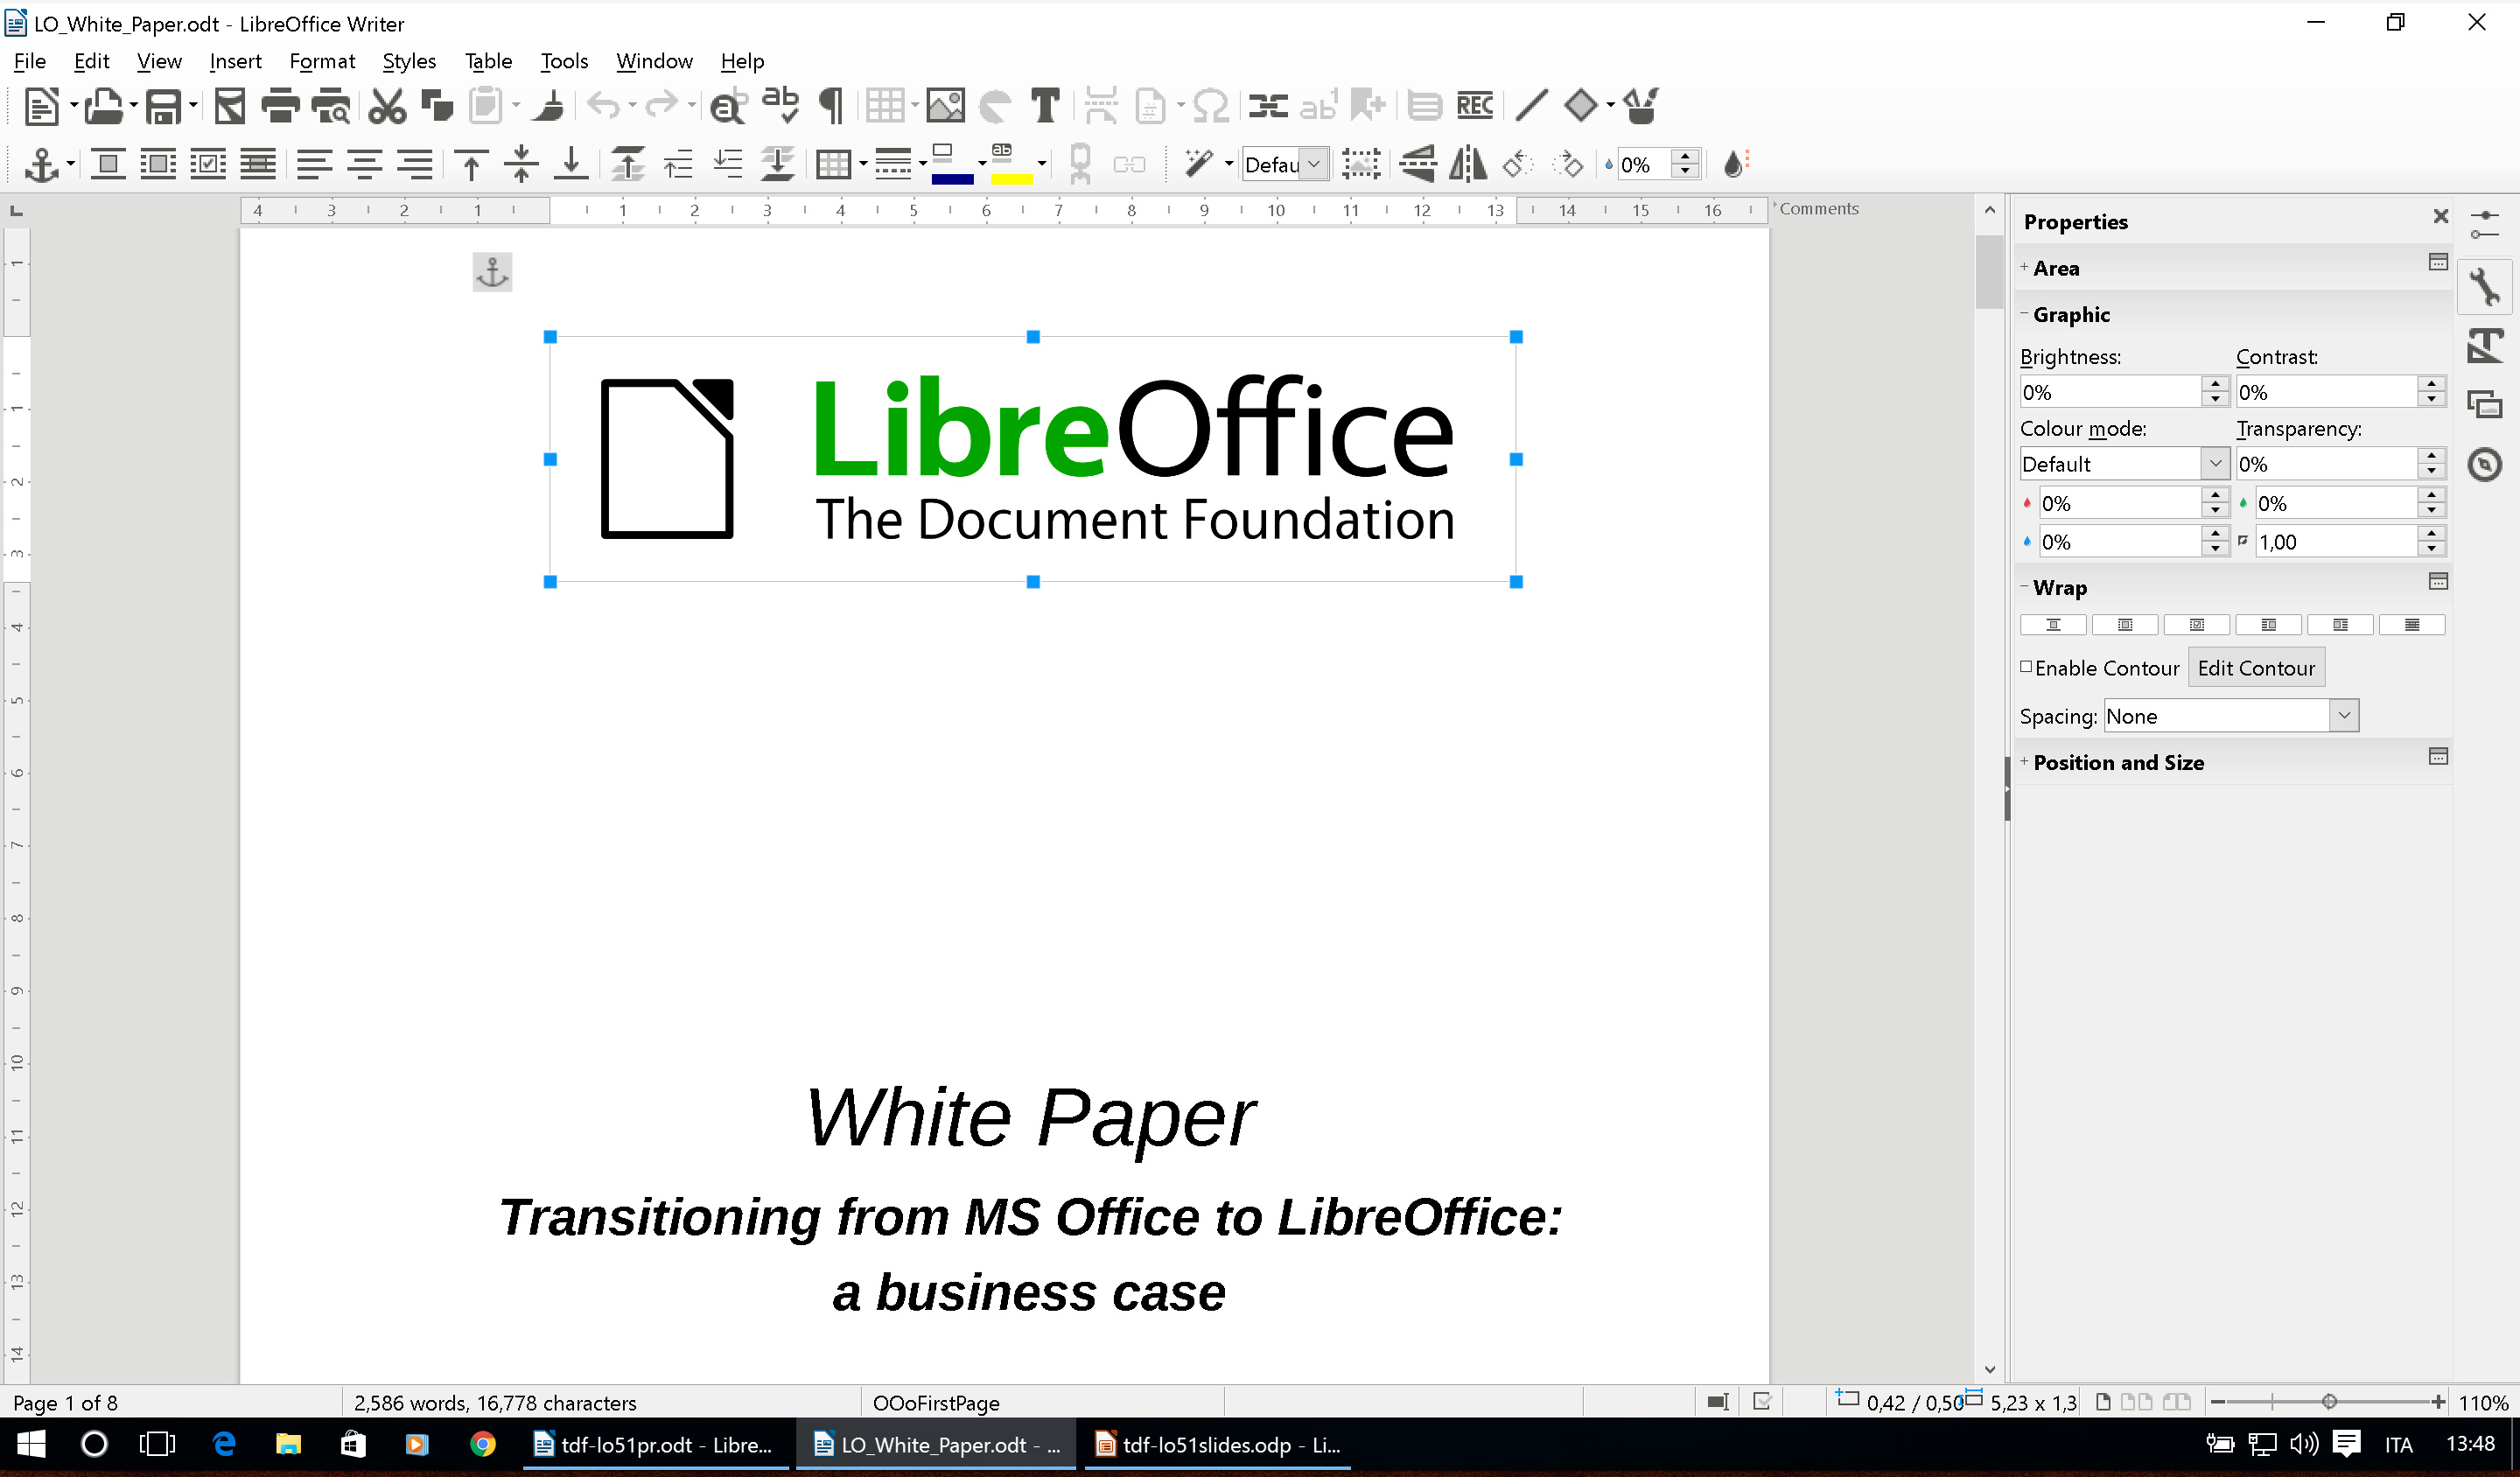 libre office free download